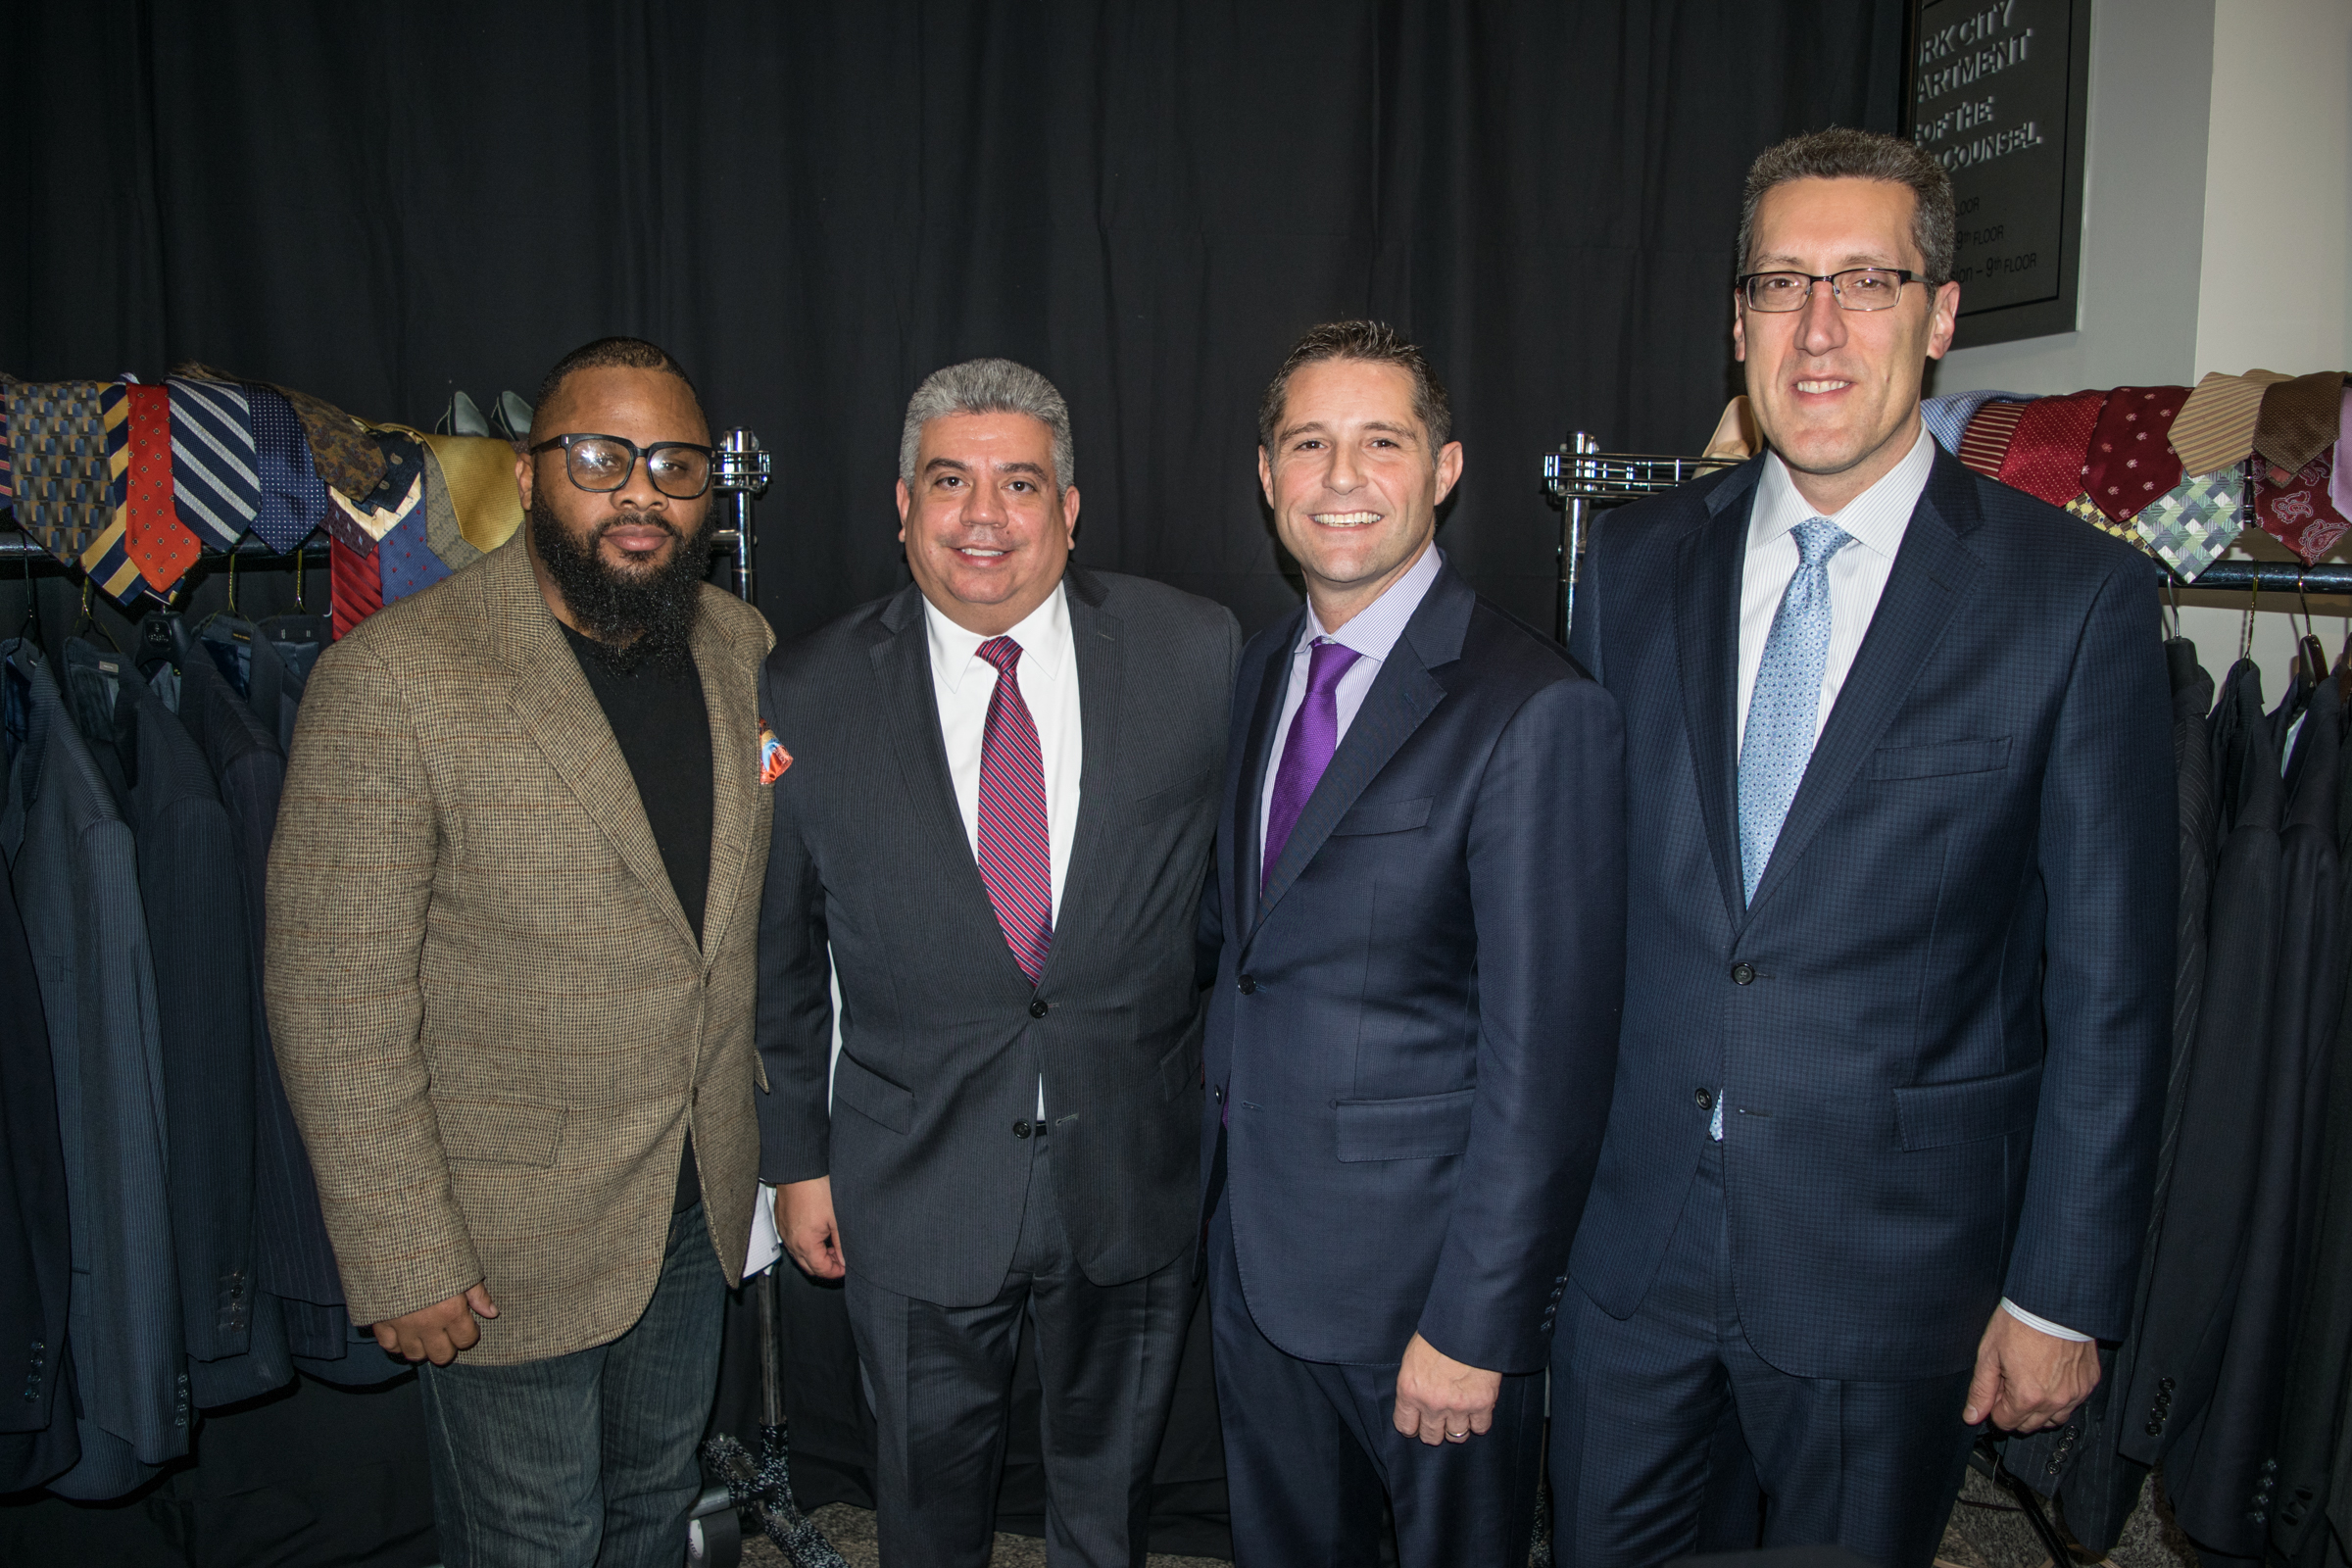 Michael Farkas (right) and District Attorney Eric Gonzalez (second from left) held a similar suit drive in 2017 (here, they are pictured with Kevin Livingston from 100 Suits for 100 Men and Michael Cibella). Brooklyn Eagle photo by Robert Abruzzese